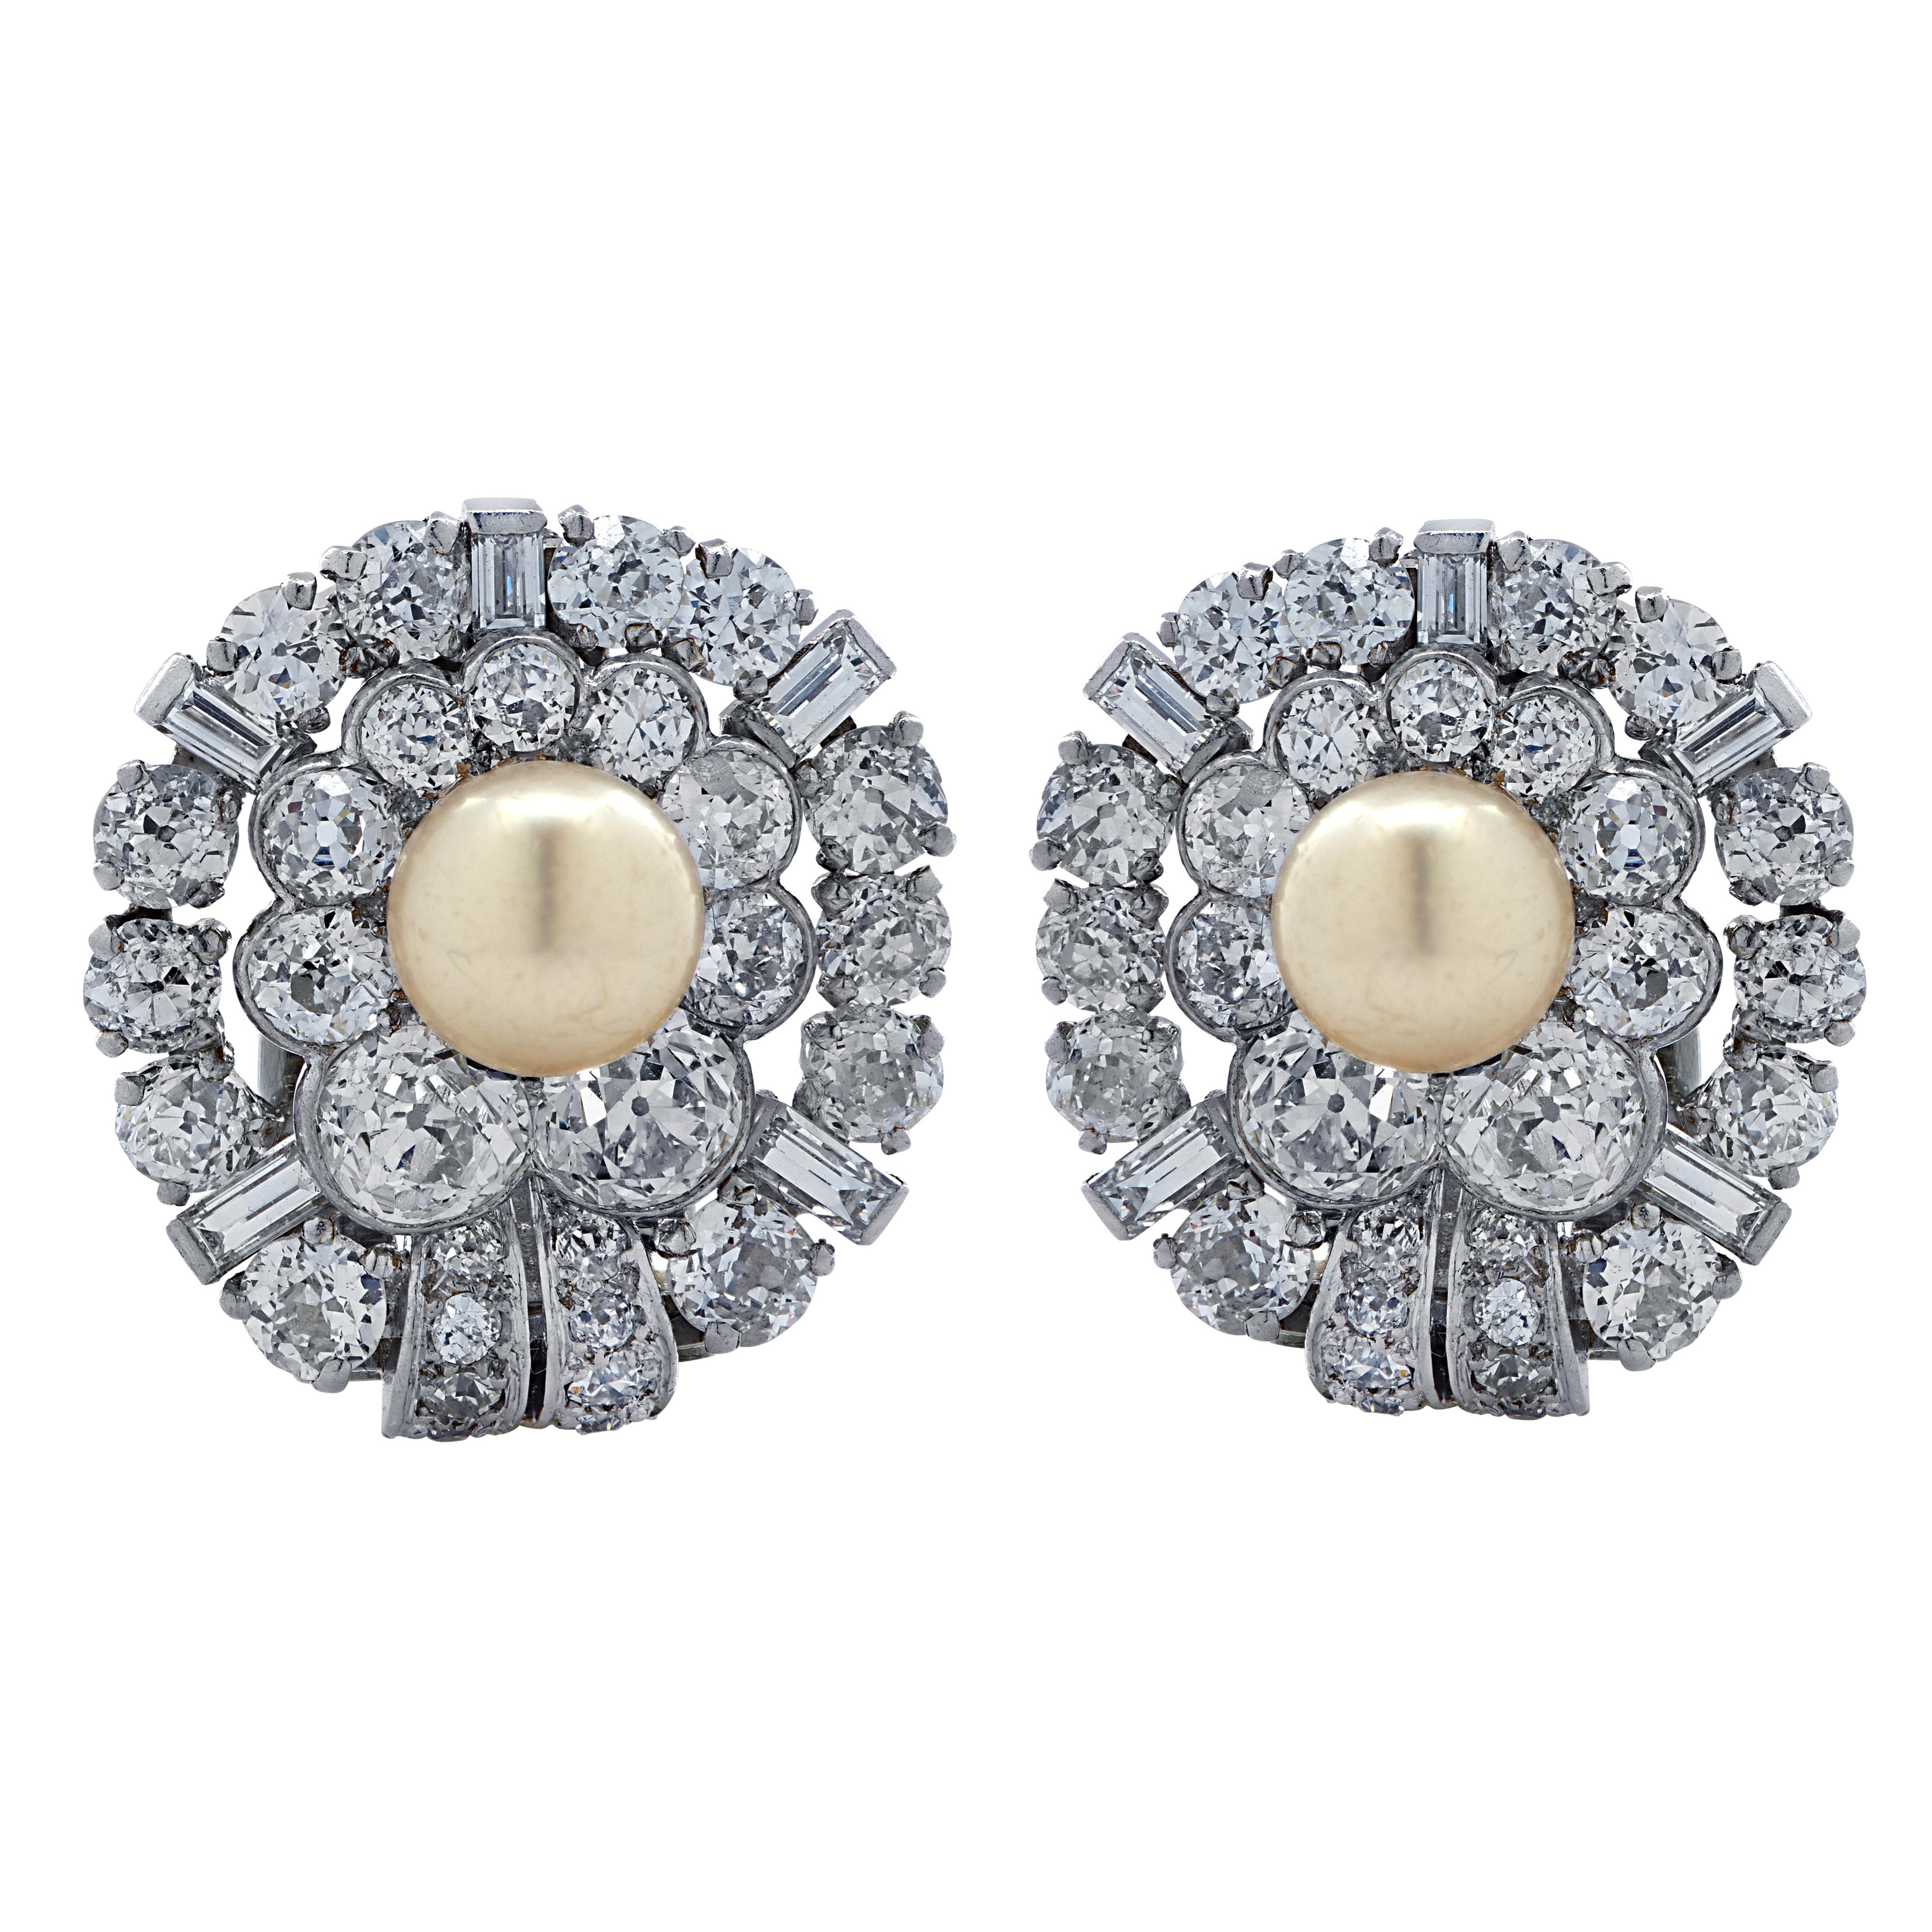 Circa 1930s exquisite clip-on earrings finely crafted in platinum, featuring two Natural Pearls measuring 7 mm in diameter set in a spectacular display of 68 Old European and baguette cut diamonds weighing 7.00 carats total, F-H color, VS-SI